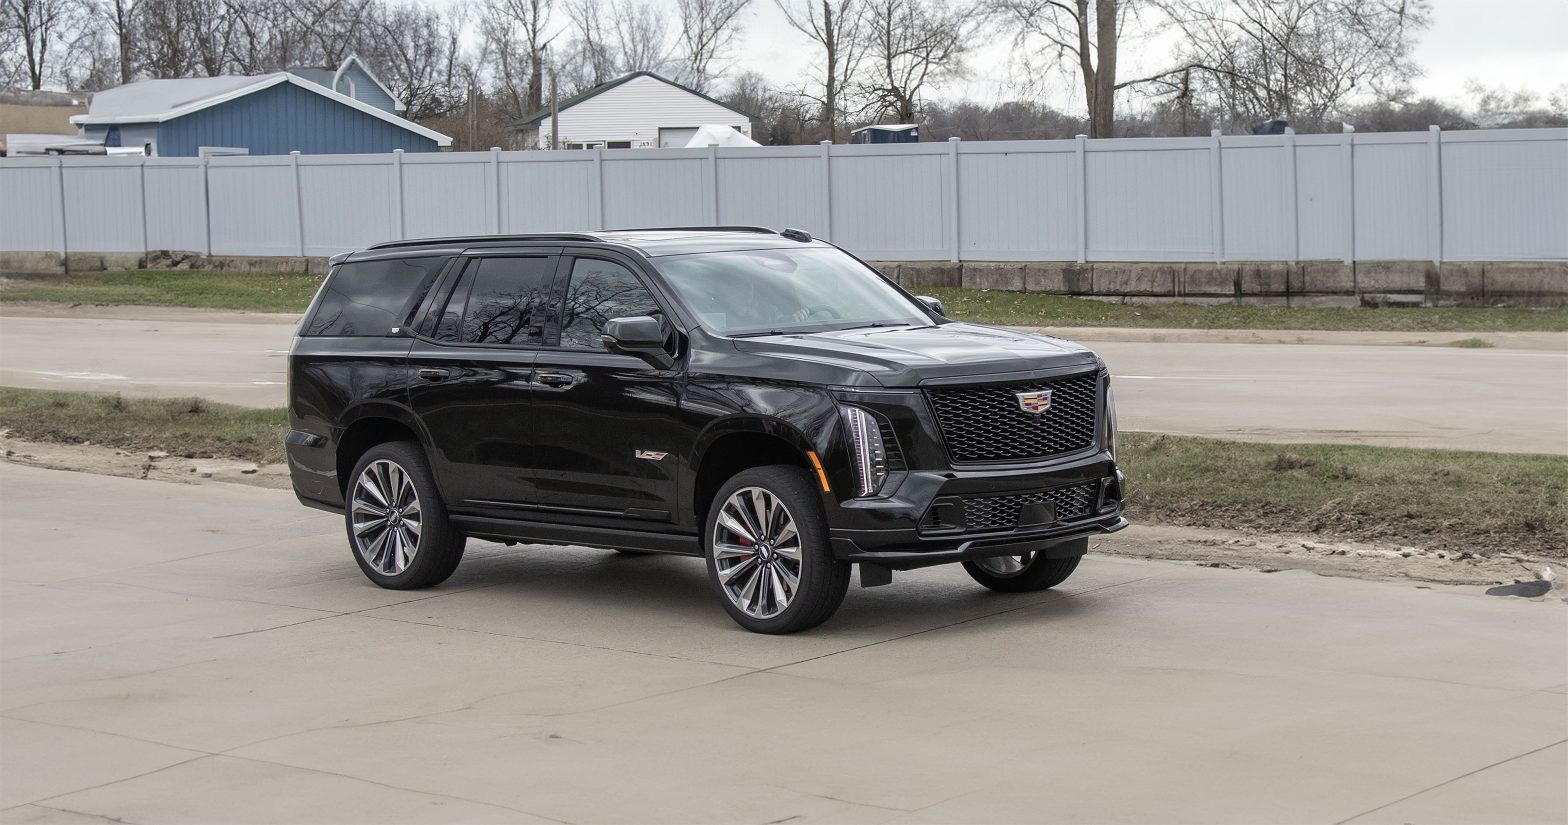 2025 Cadillac Escalade V Caught Undisguised With New Styling & Huge Interior Changes